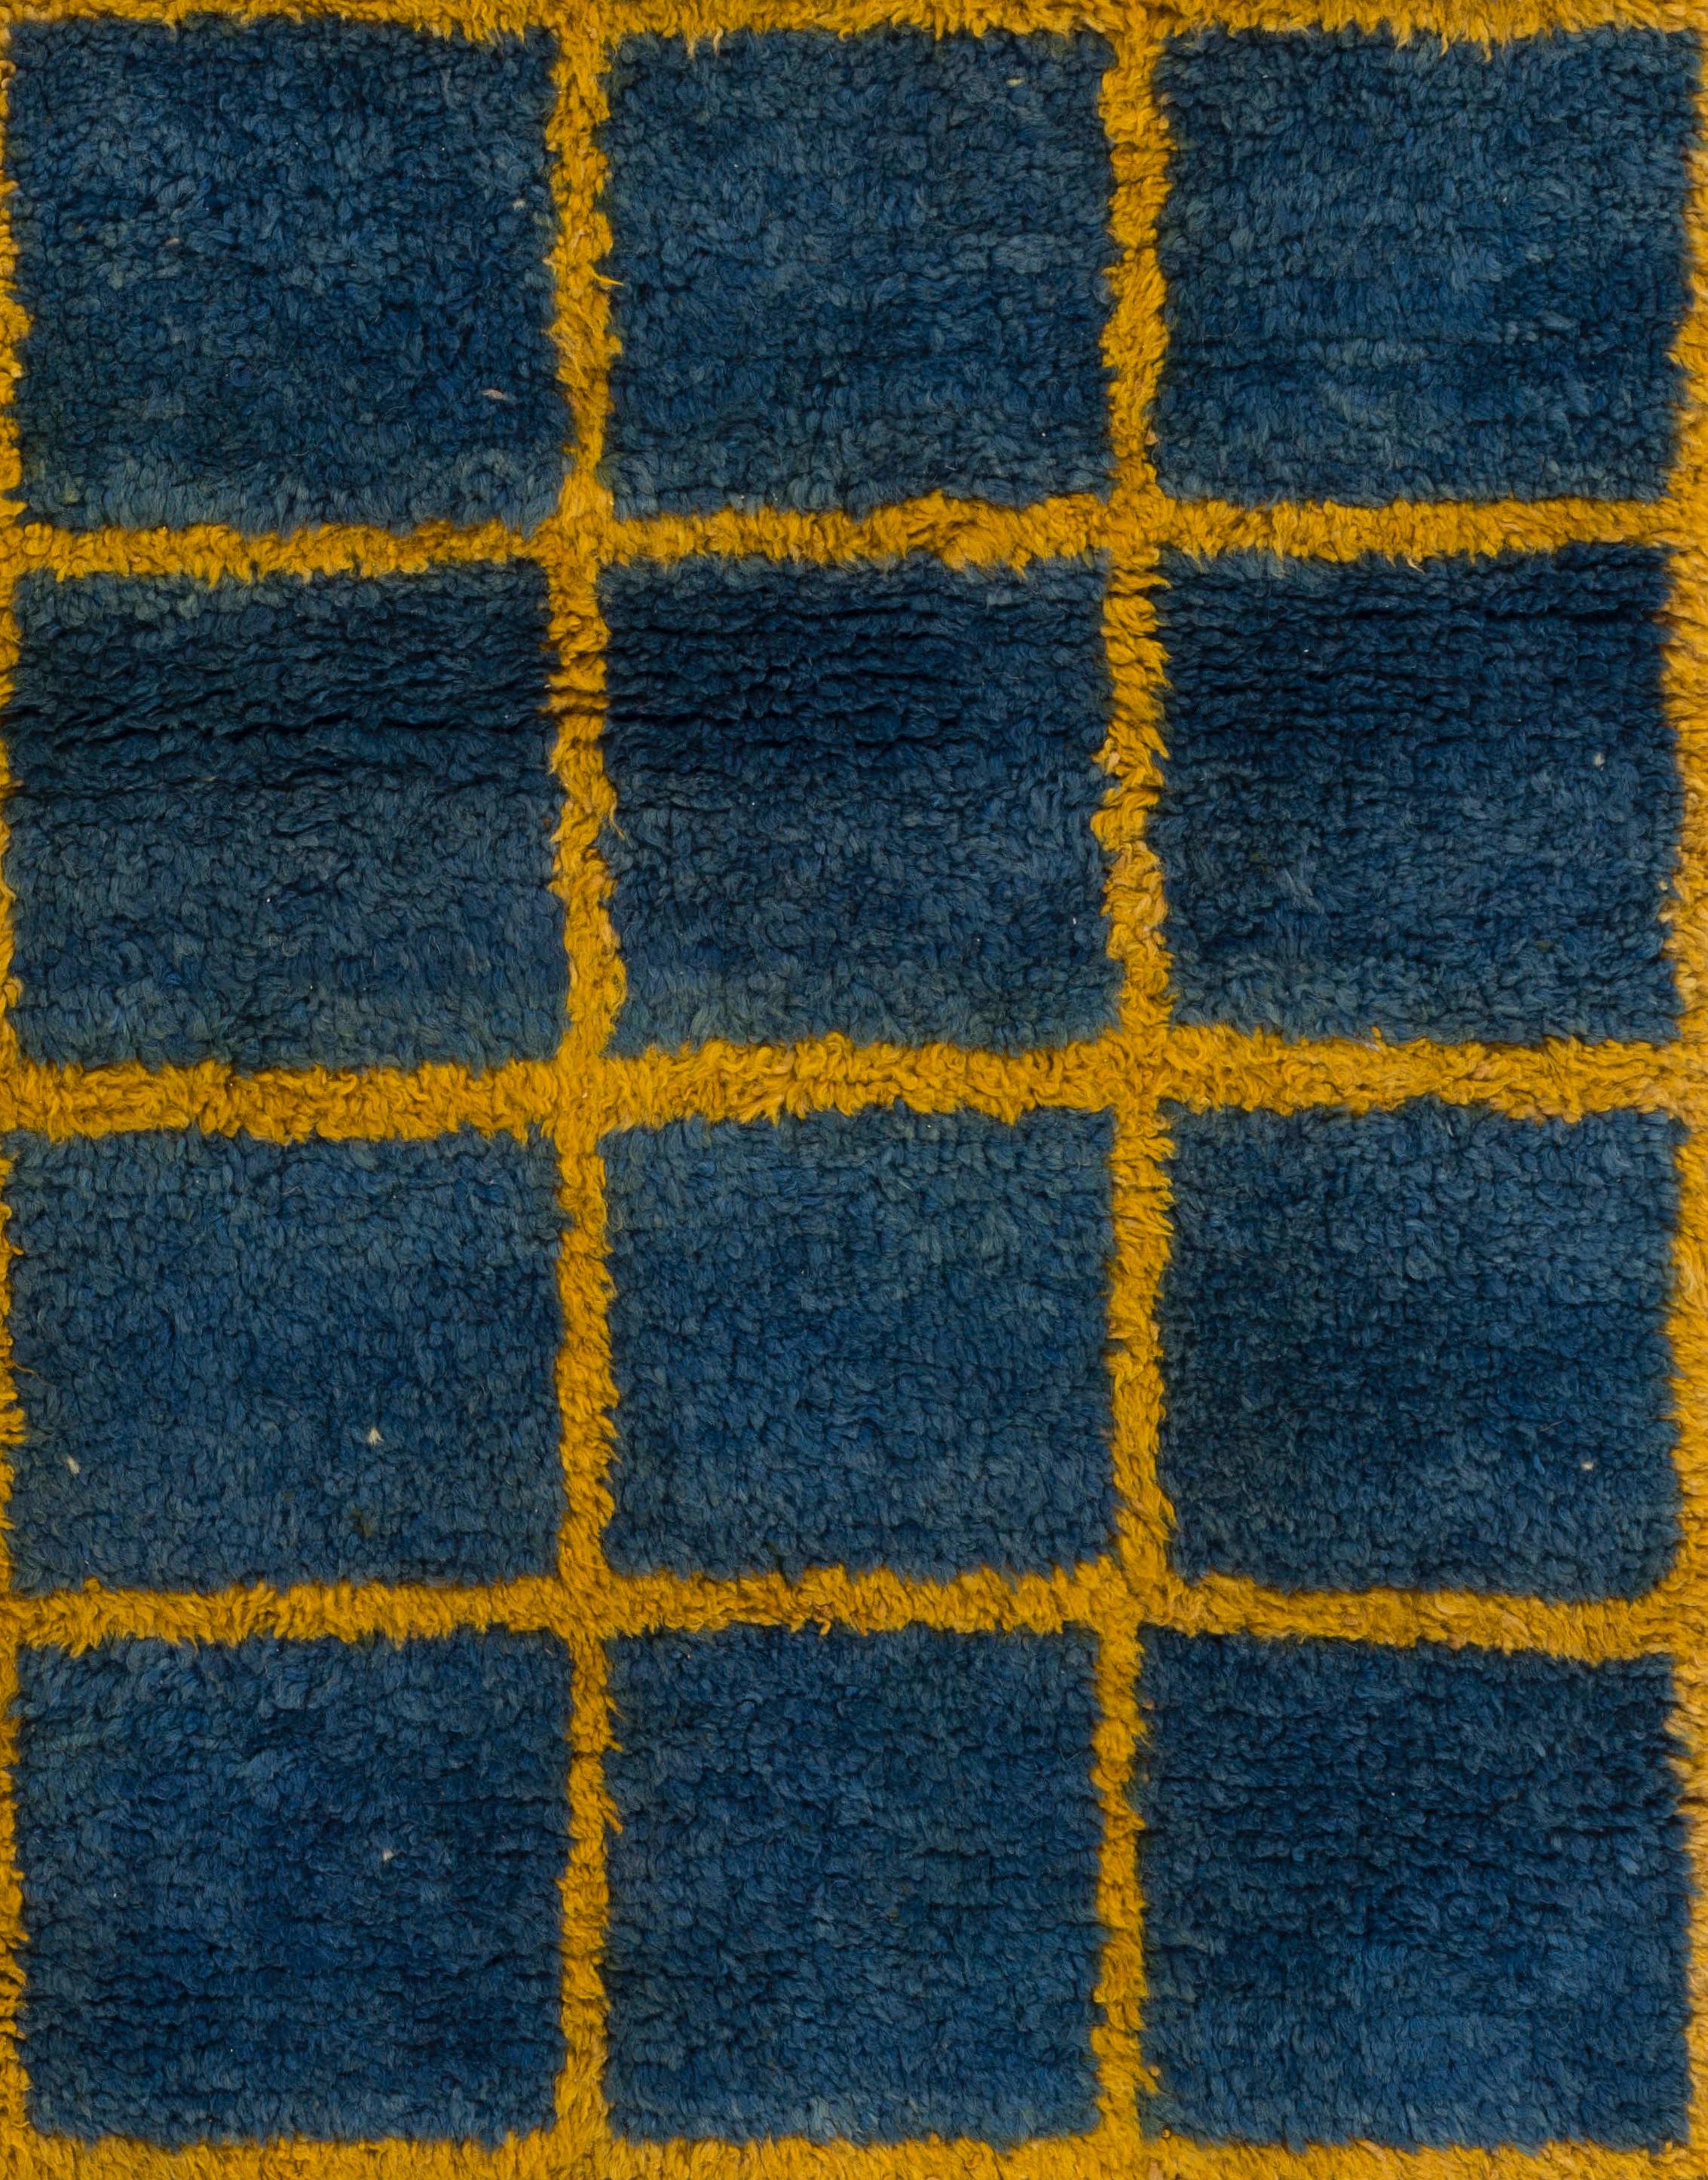 Hand-Knotted 4x6.6 Ft Vintage Checkered 'Tulu' Rug in Blue & Yellow, Custom Options Available